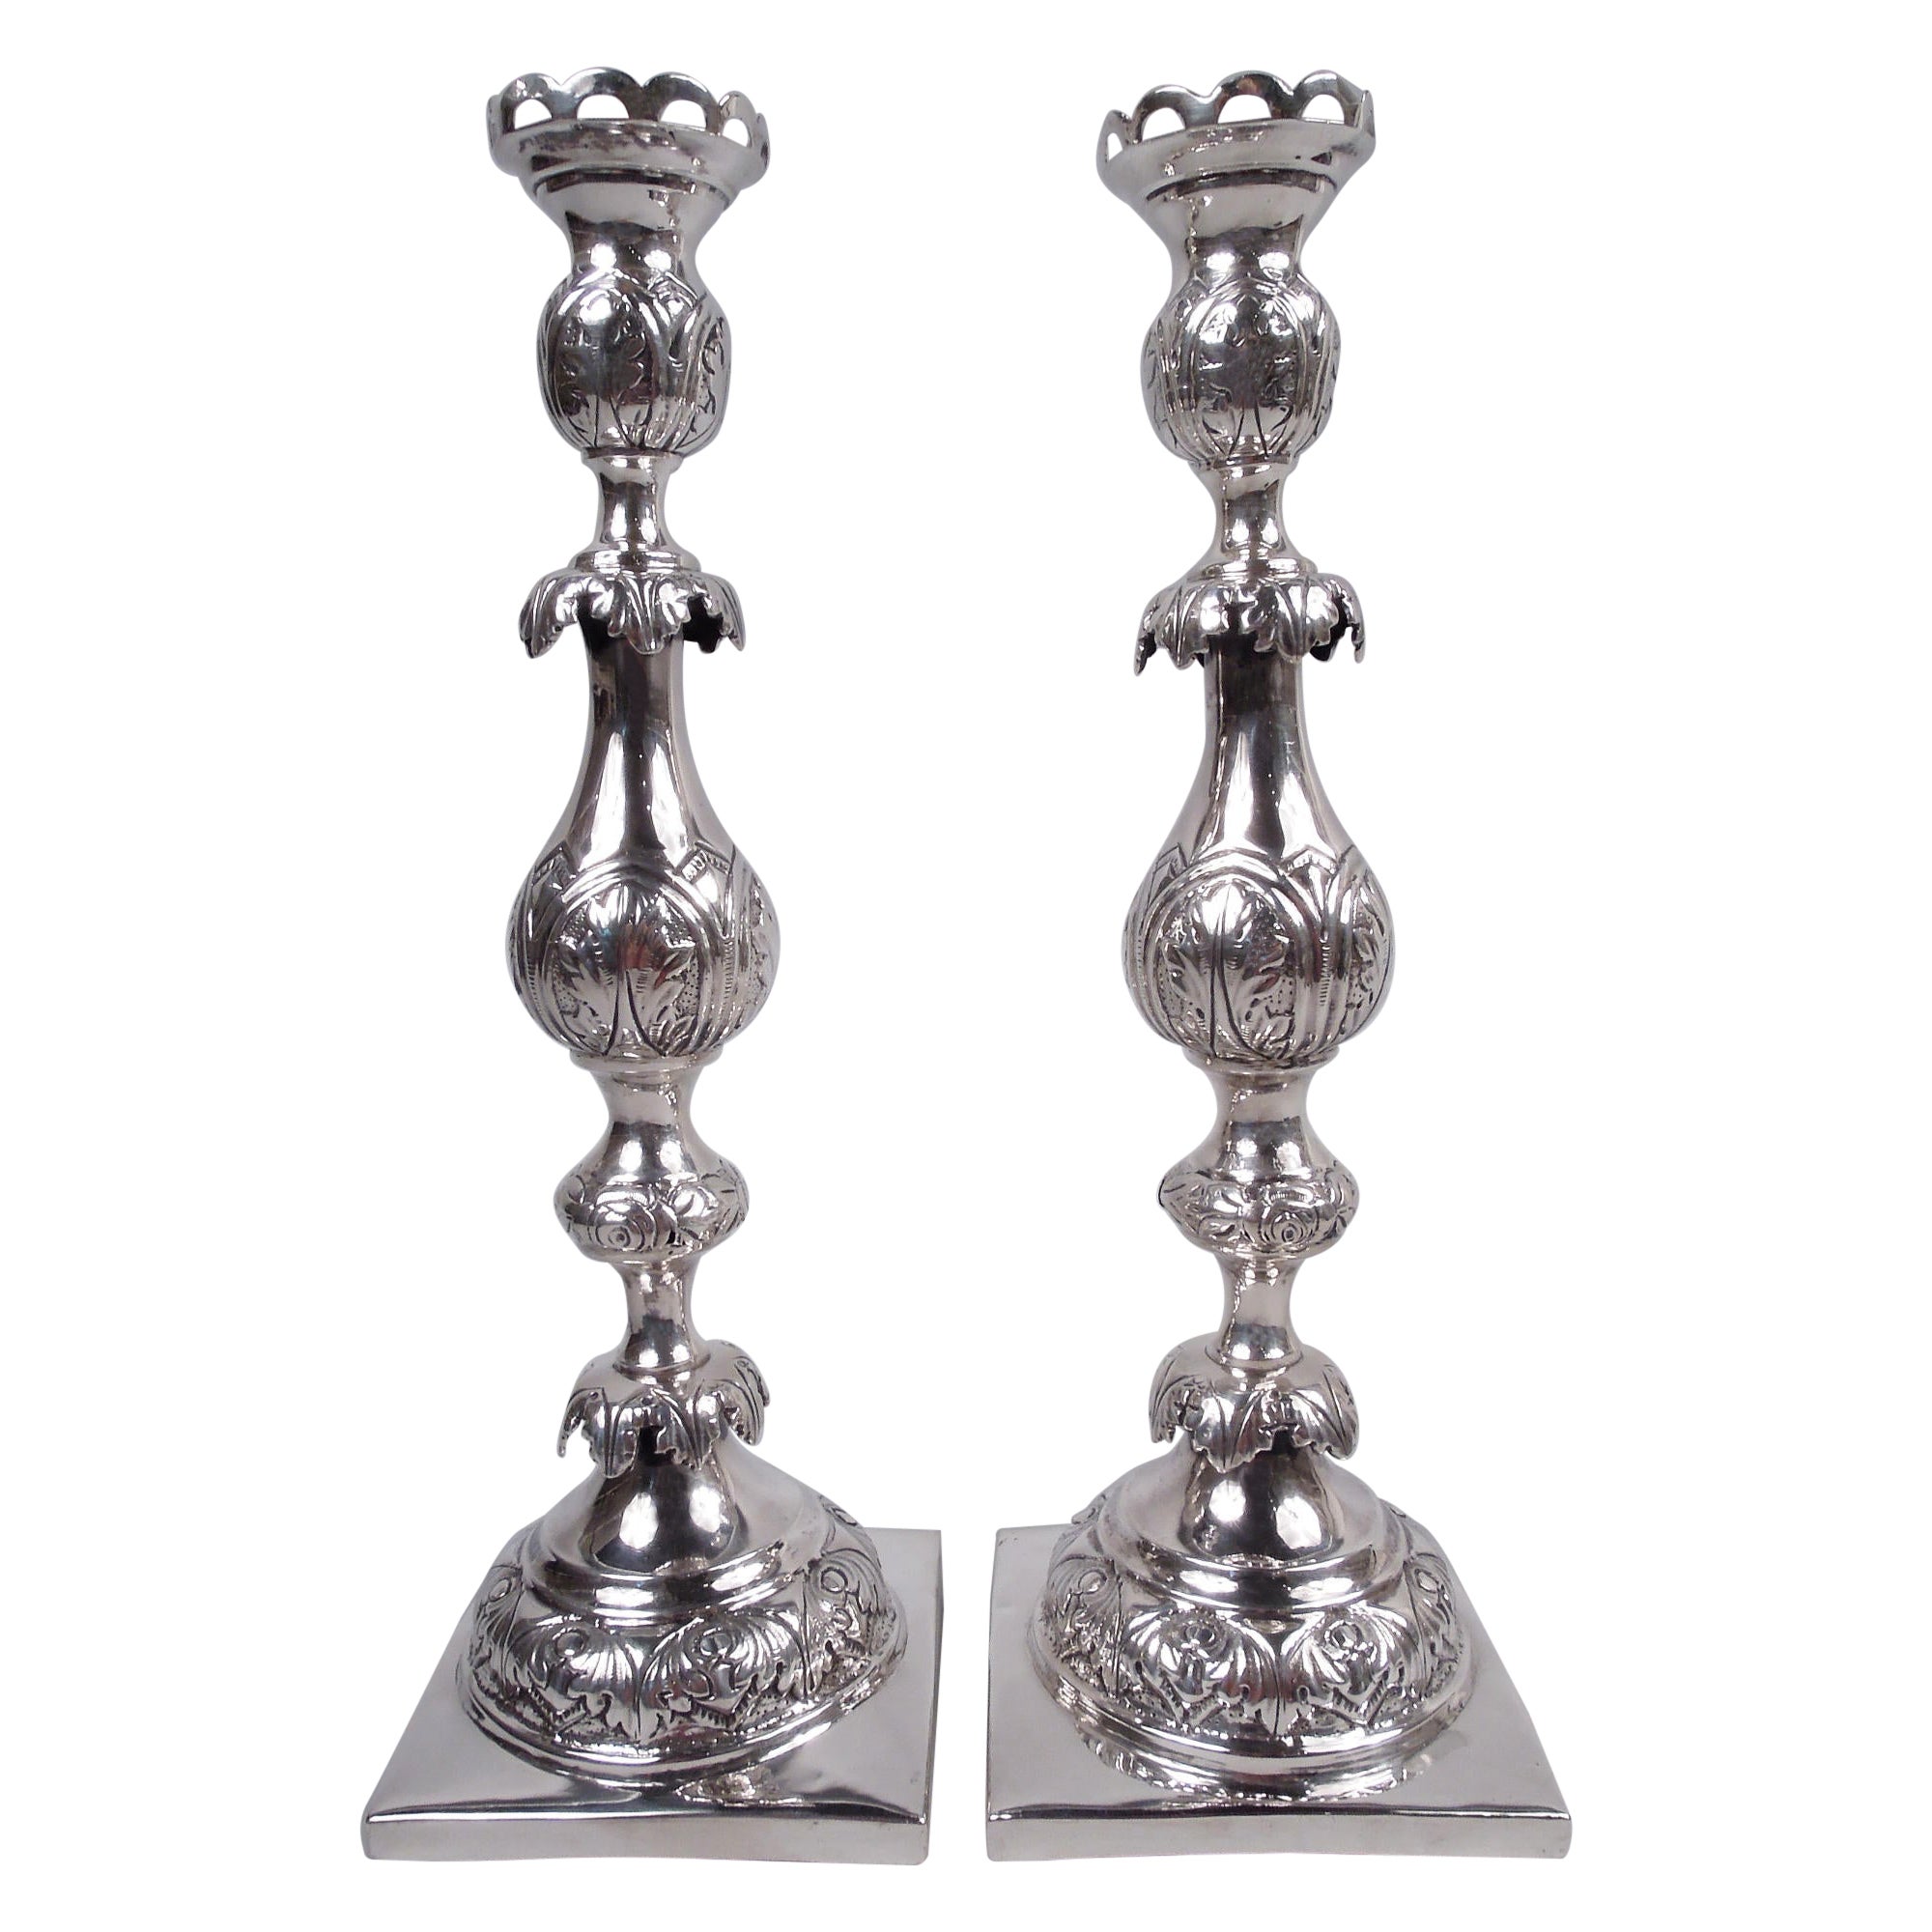 Pair of Antique Russian Classical Silver Candlesticks  